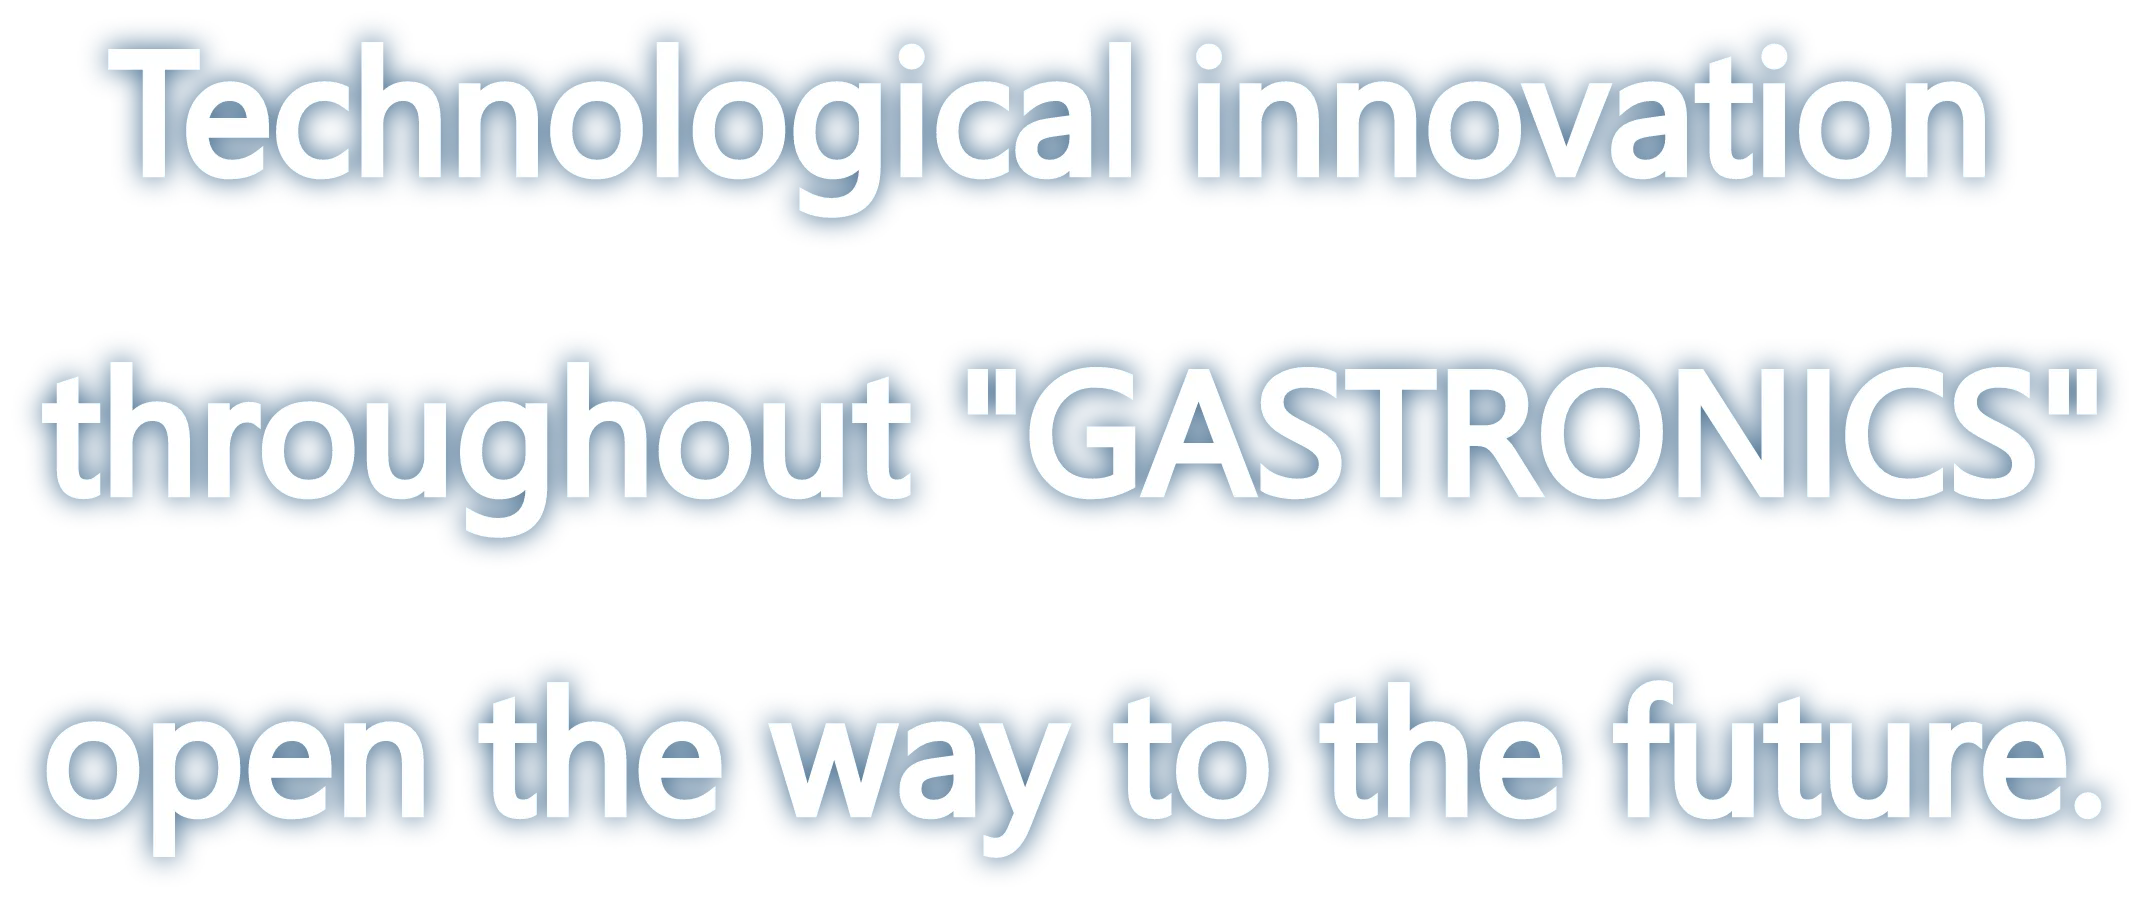 Technological innovation throughout ”GASTRONICS” open the way to the future.